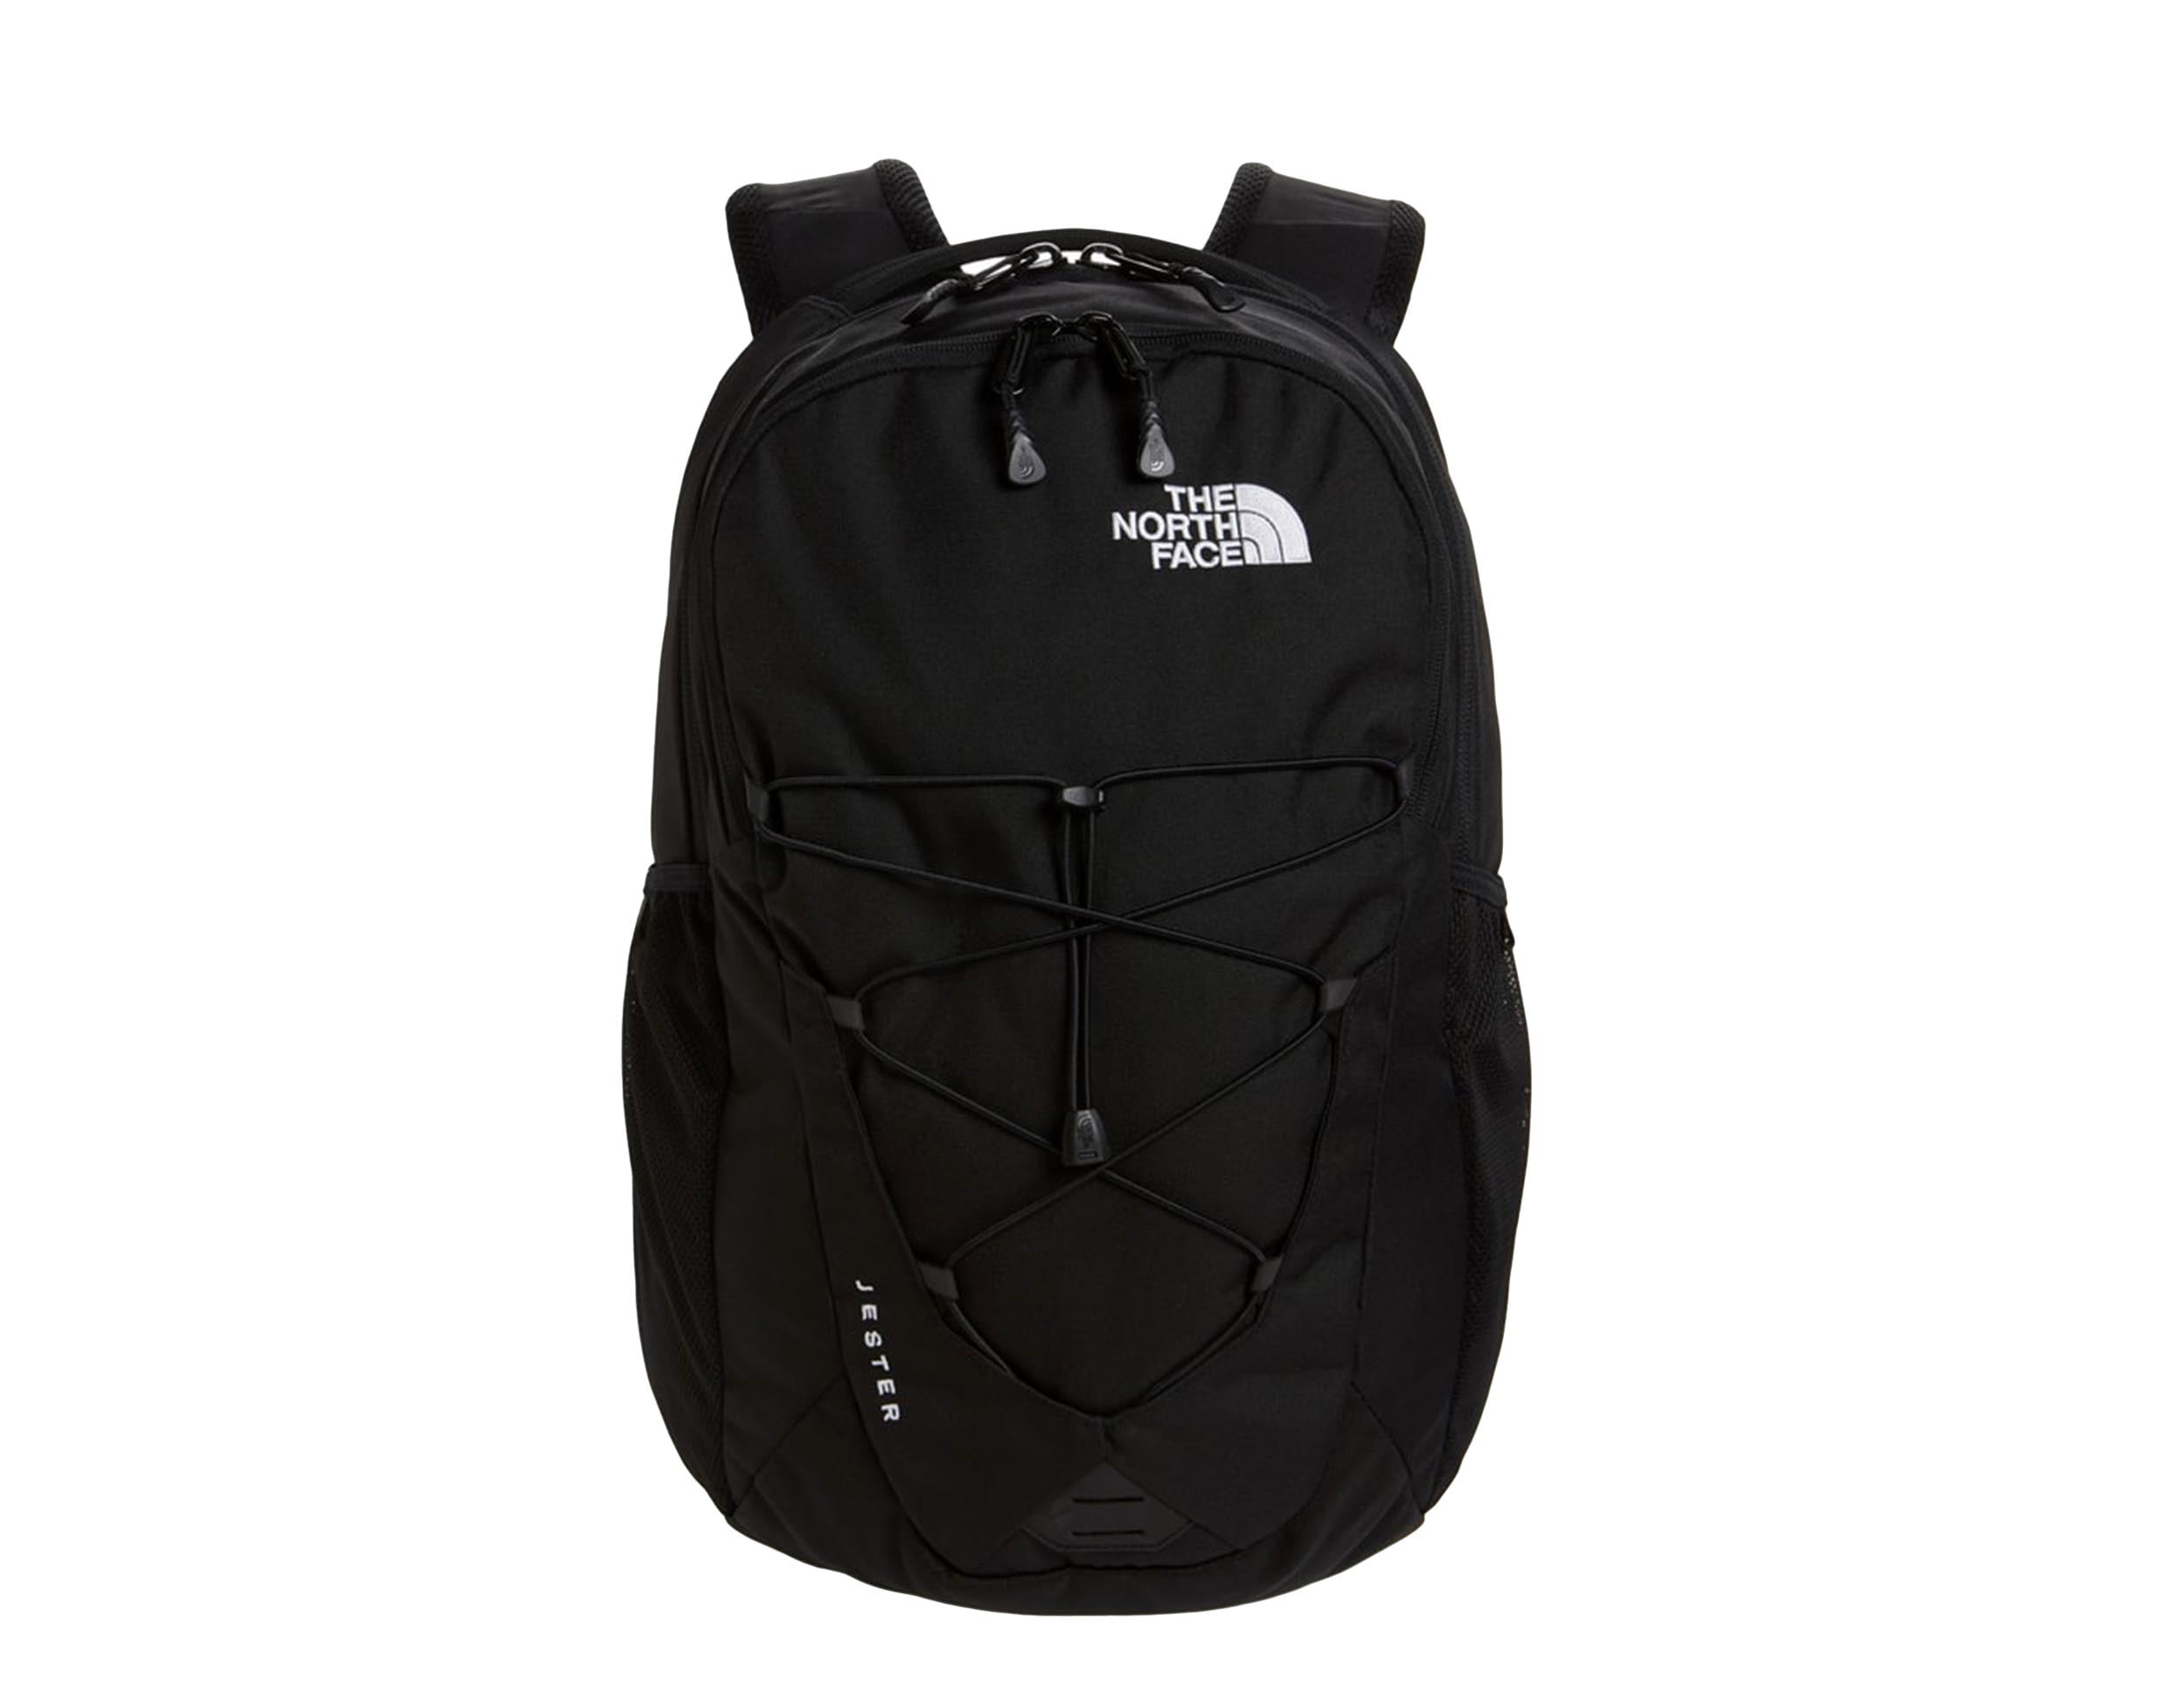 Black The North Face Jester Cross Body Bag - JD Sports Global